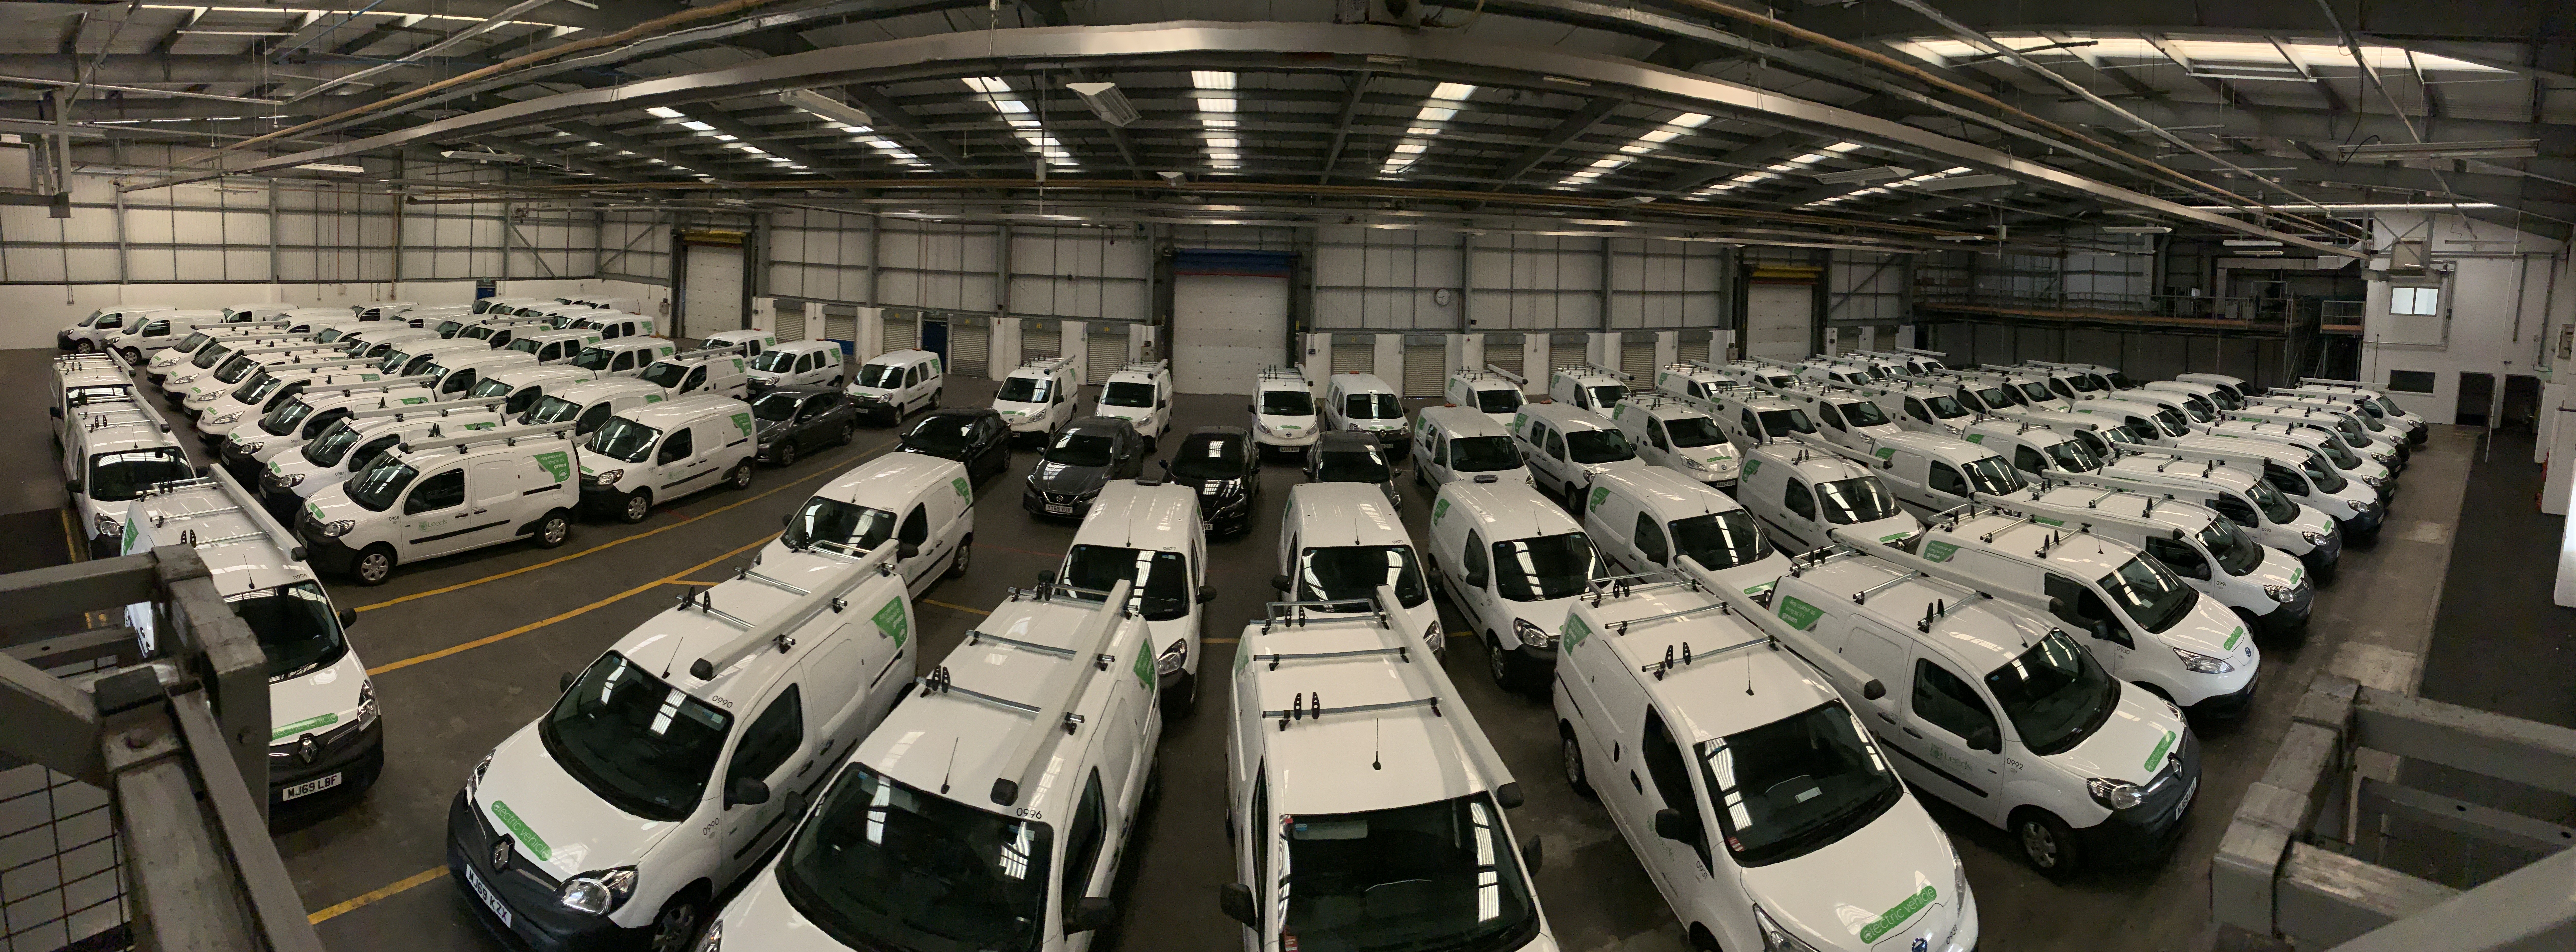 A warehouse full of white electric vans